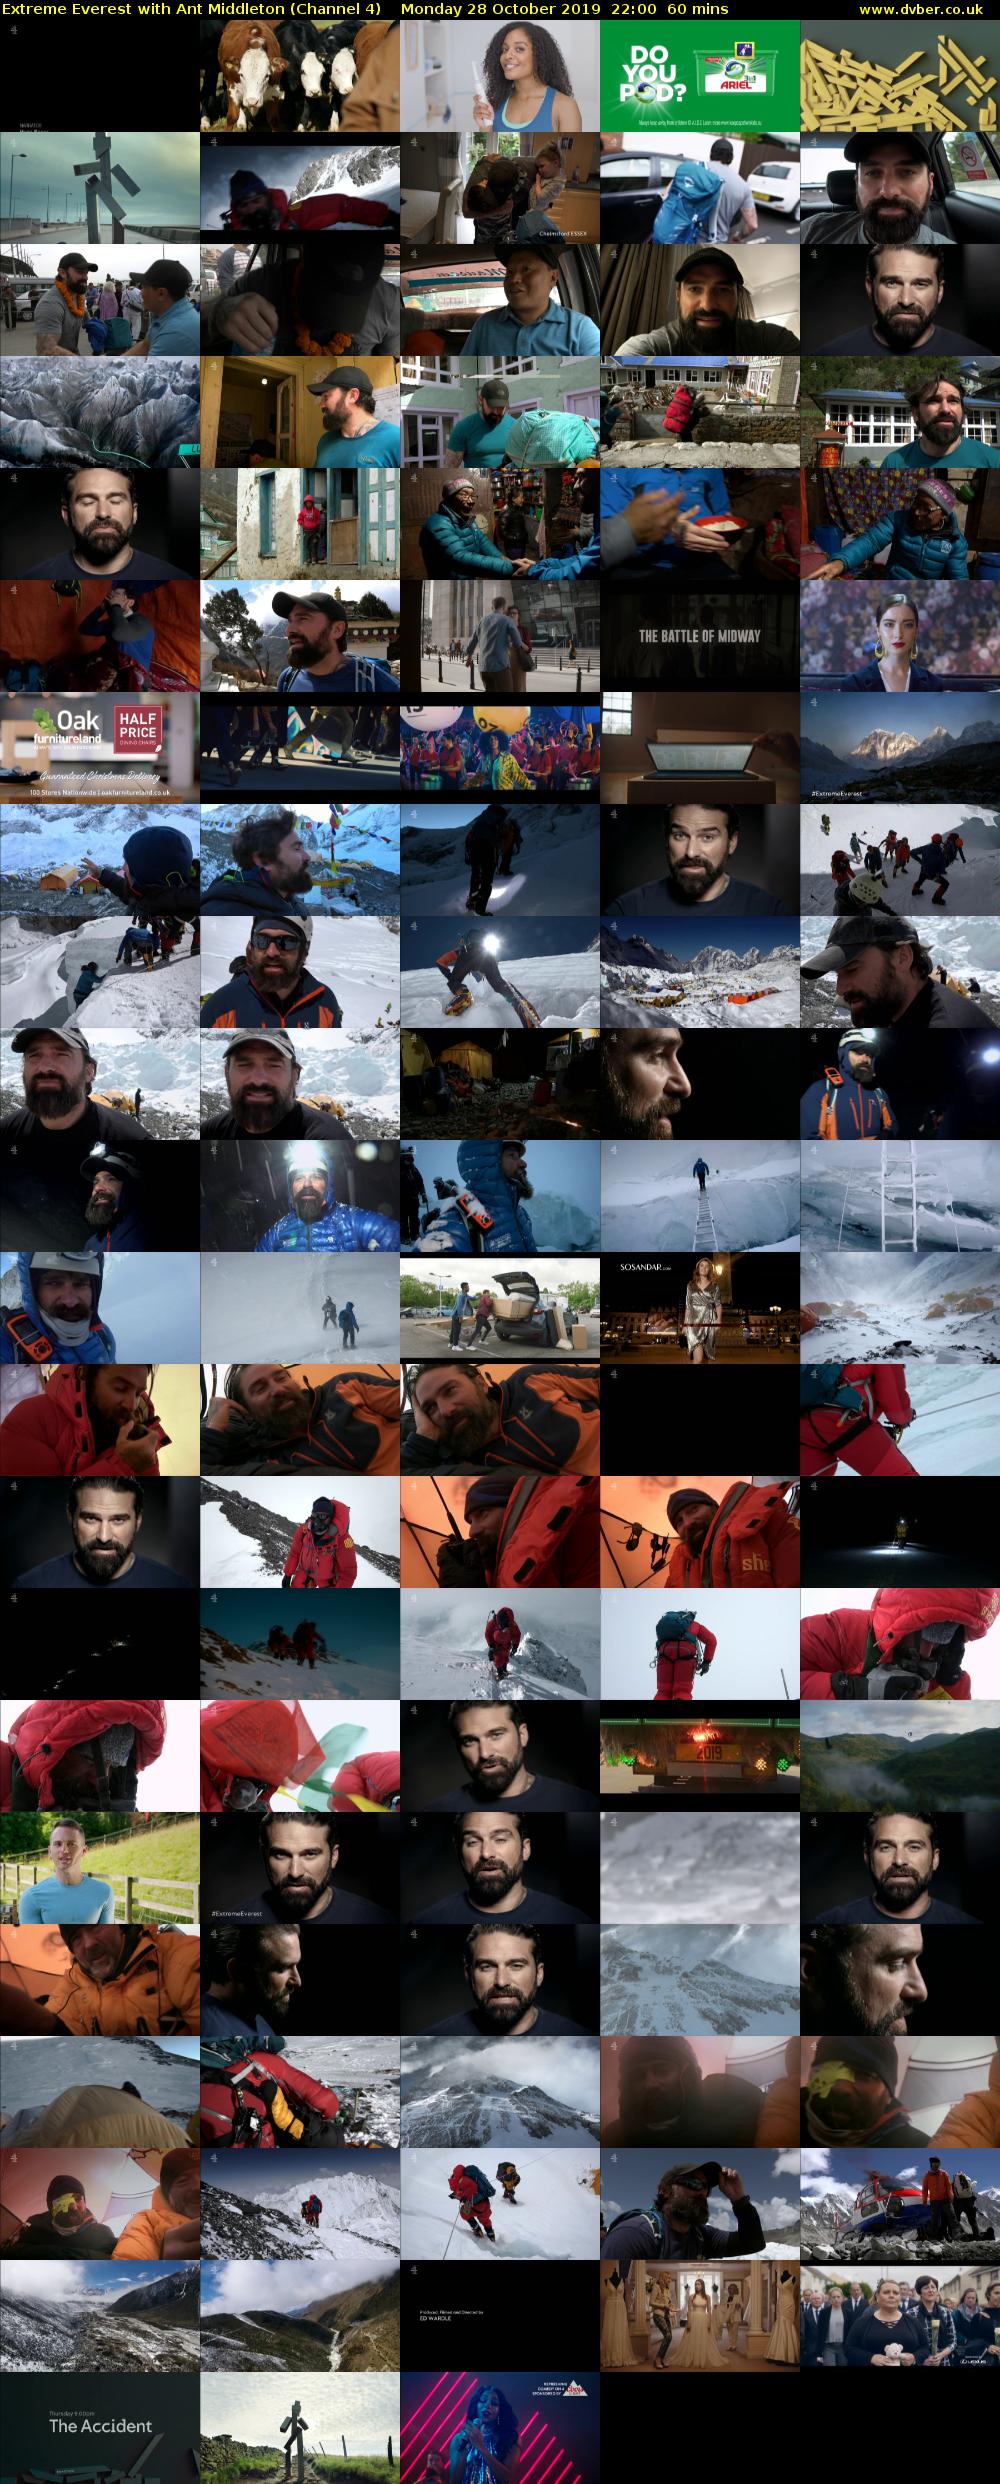 Extreme Everest with Ant Middleton (Channel 4) Monday 28 October 2019 22:00 - 23:00